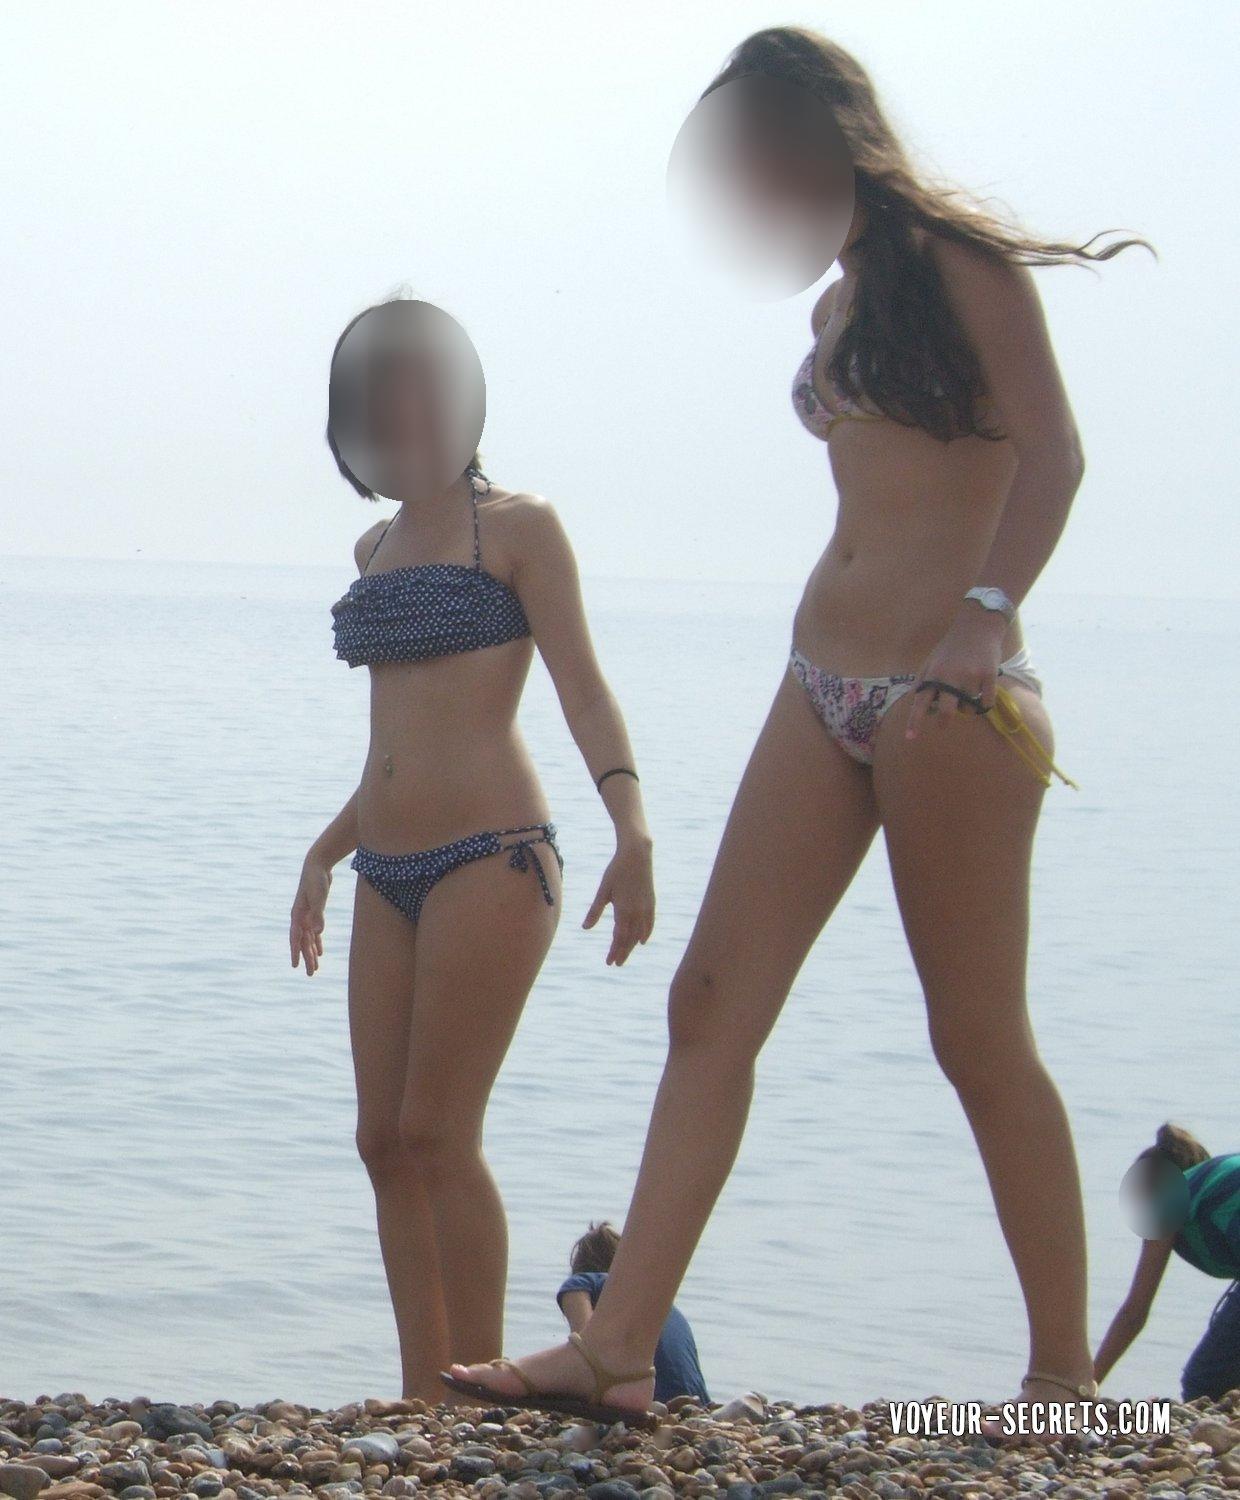 Spying on teen girls at beach image